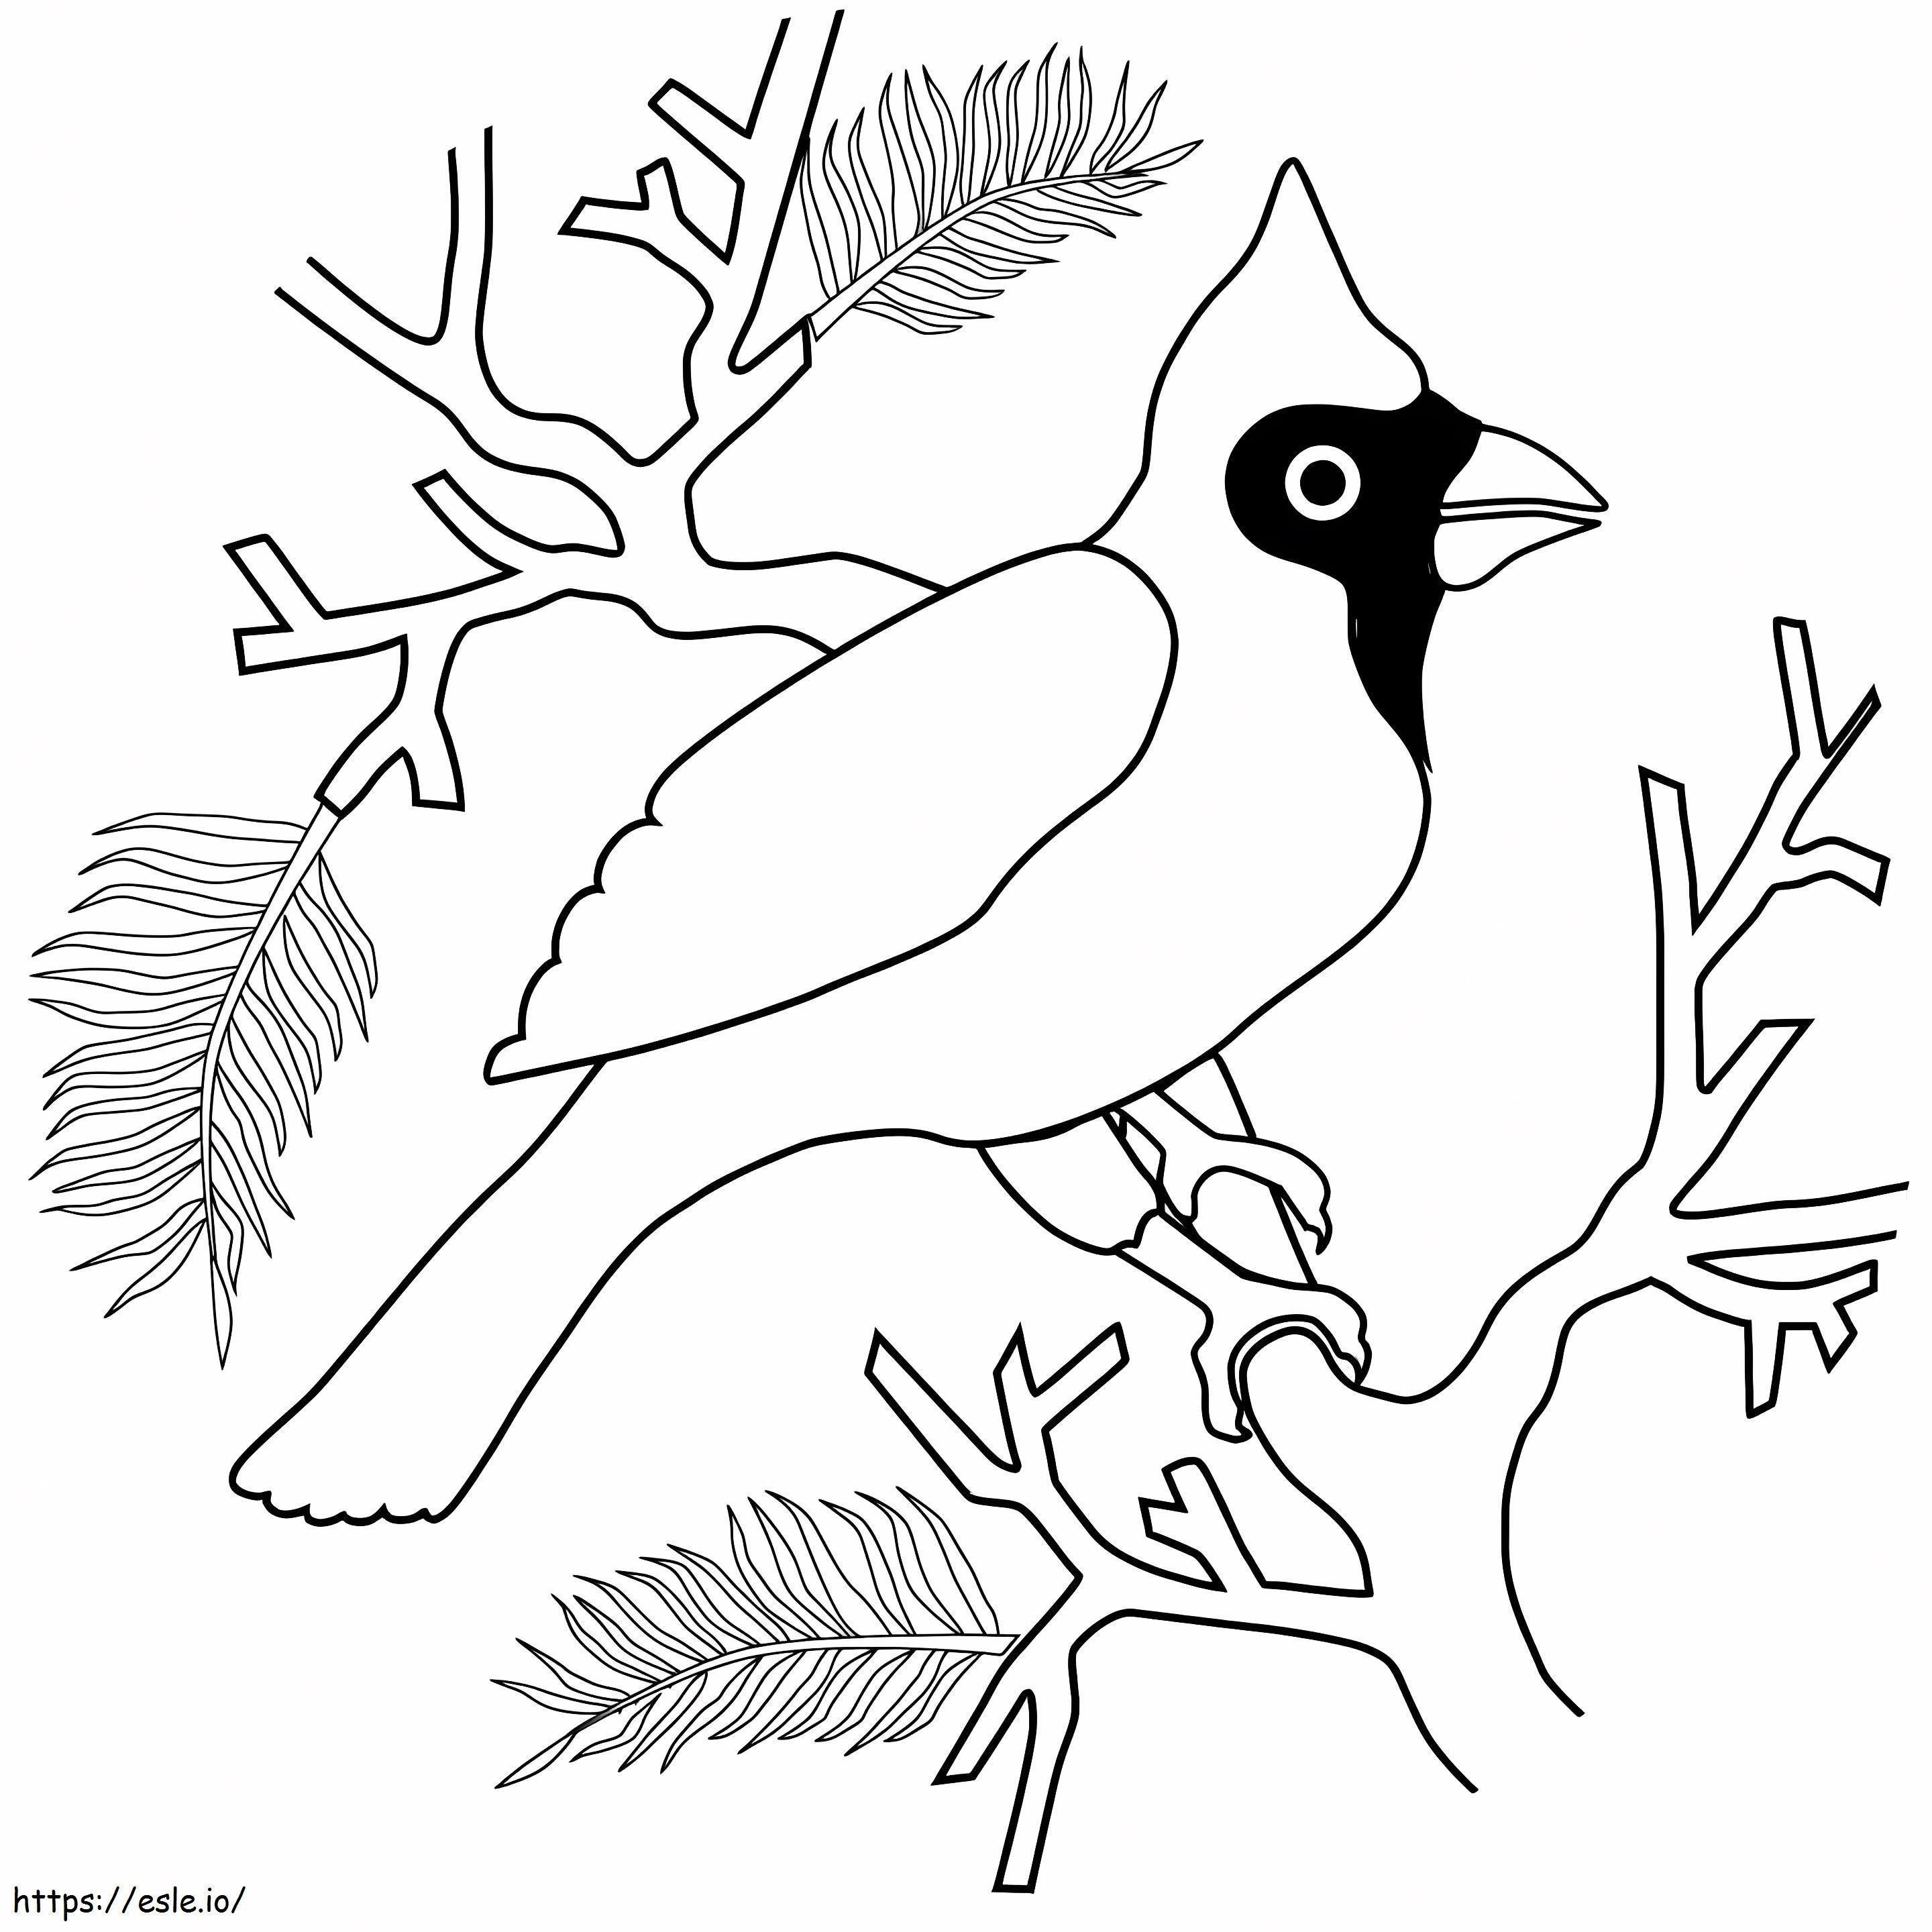 Easy Cardinal On A Tree coloring page